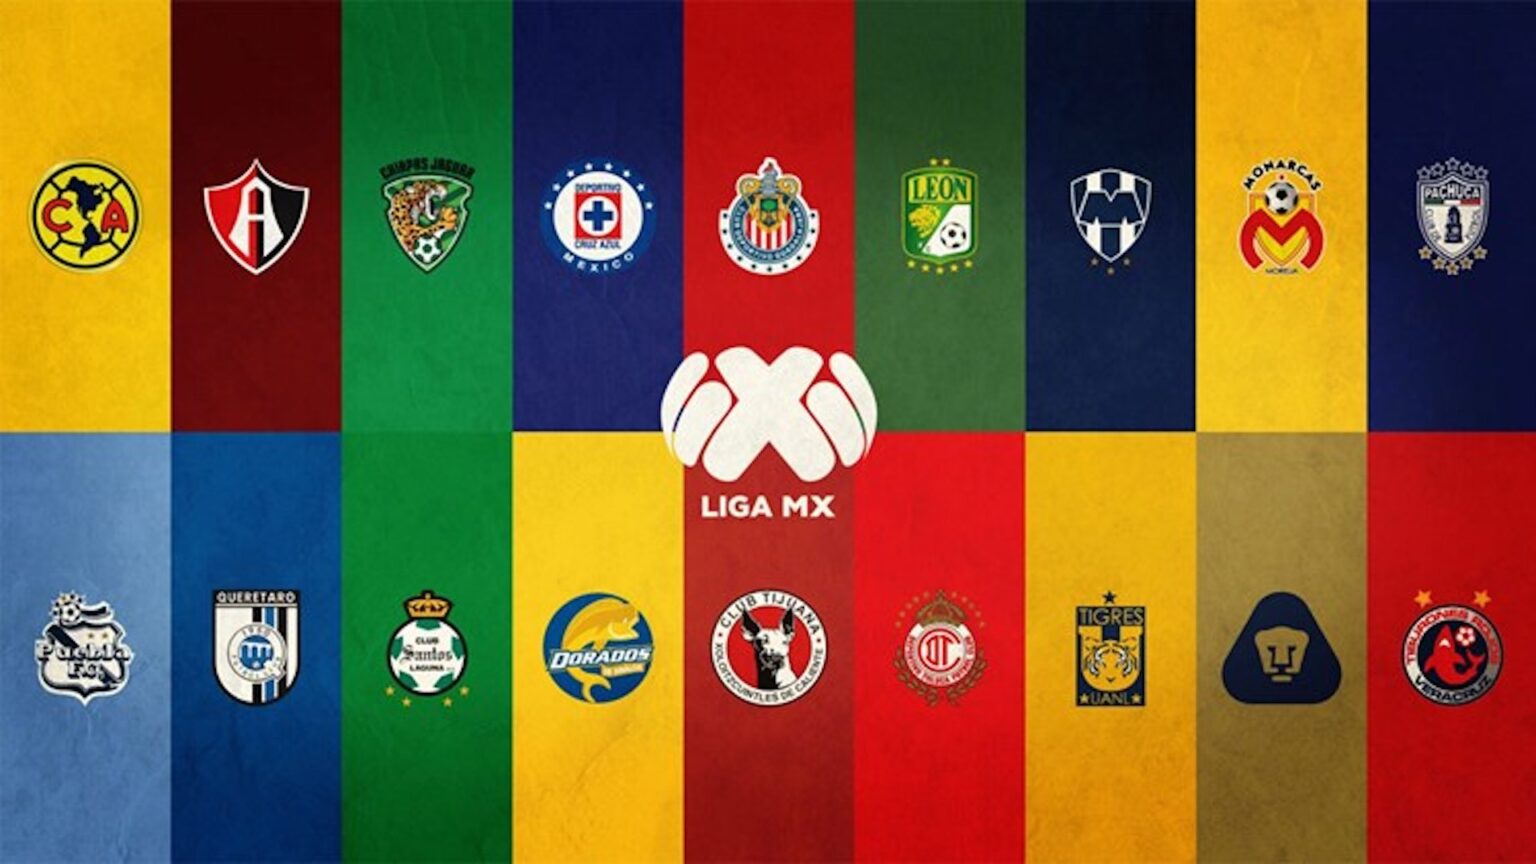 After finishing their only tournament in 2020, Liga MX is back with all new games. Here are all the ones you should circle on your calendar.